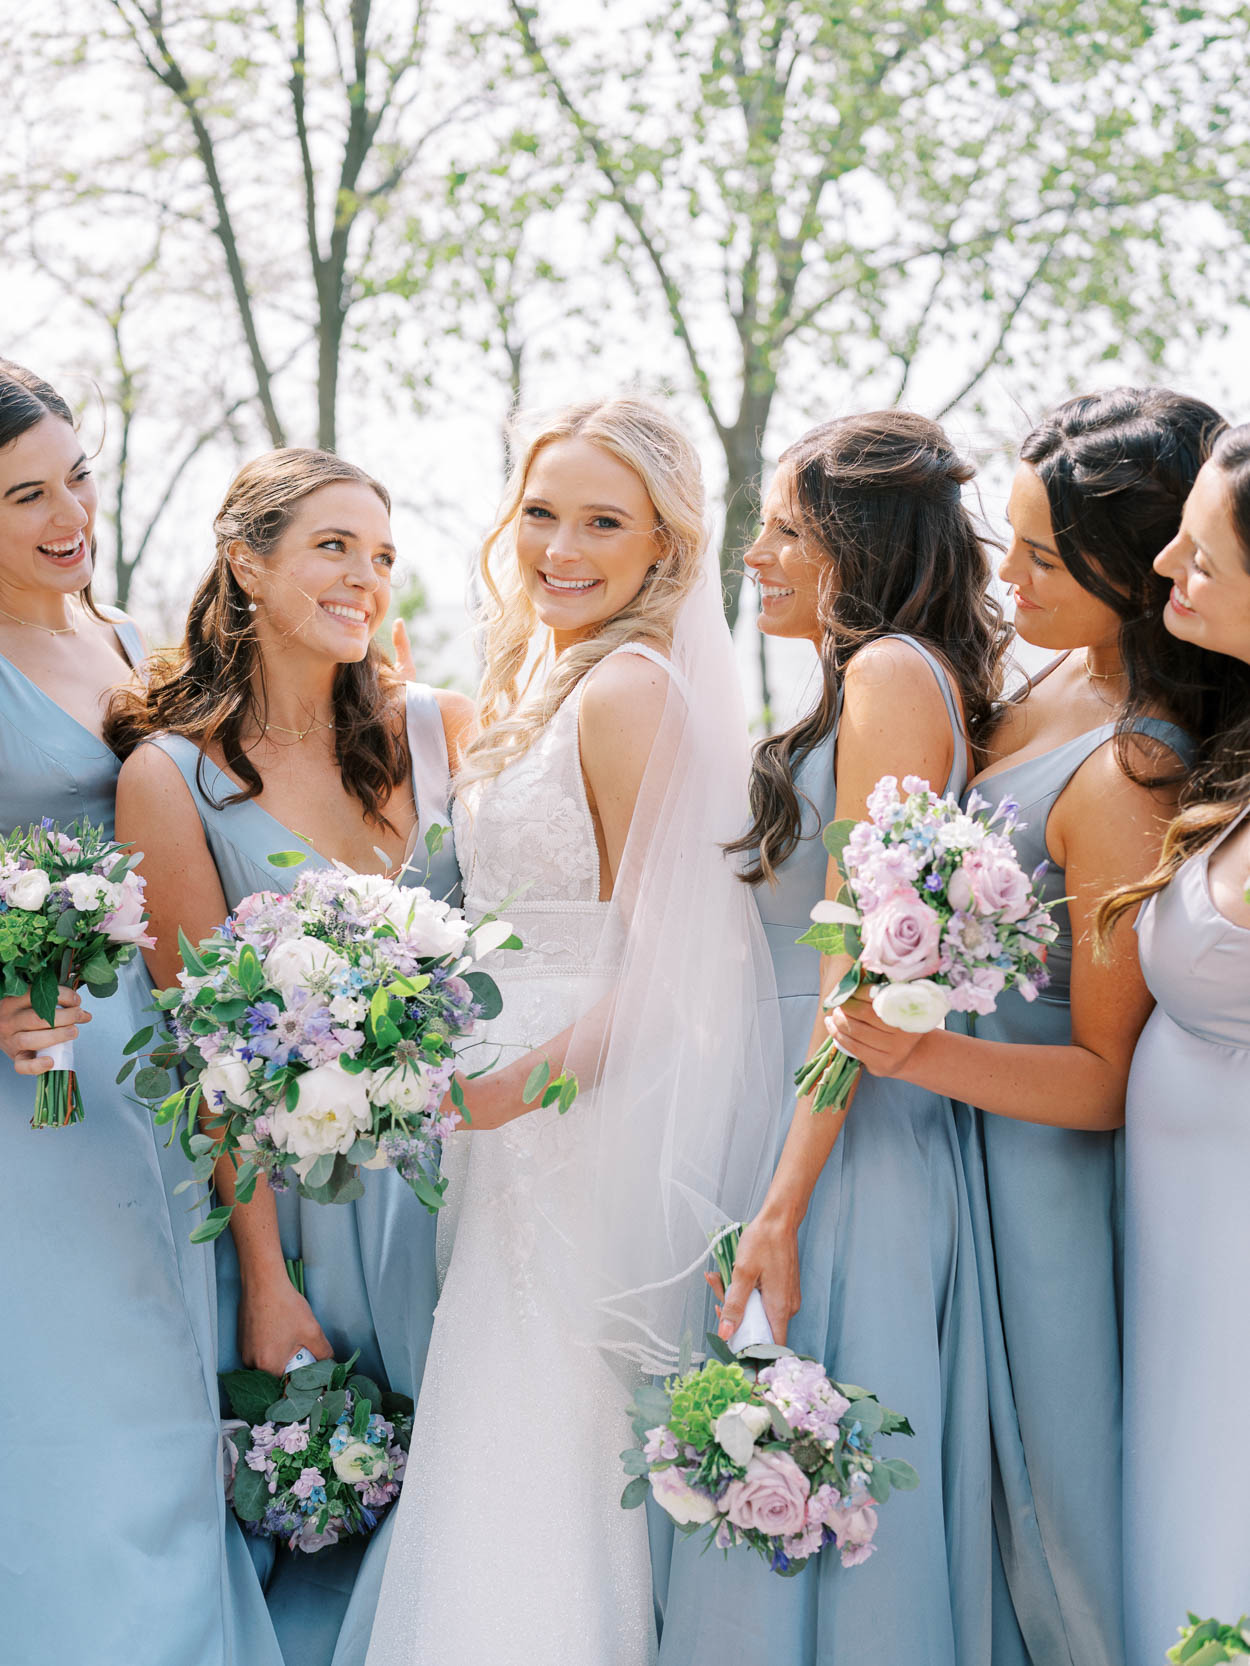 Bridesmaid portraits at Lakewood Park in Cleveland, Ohio